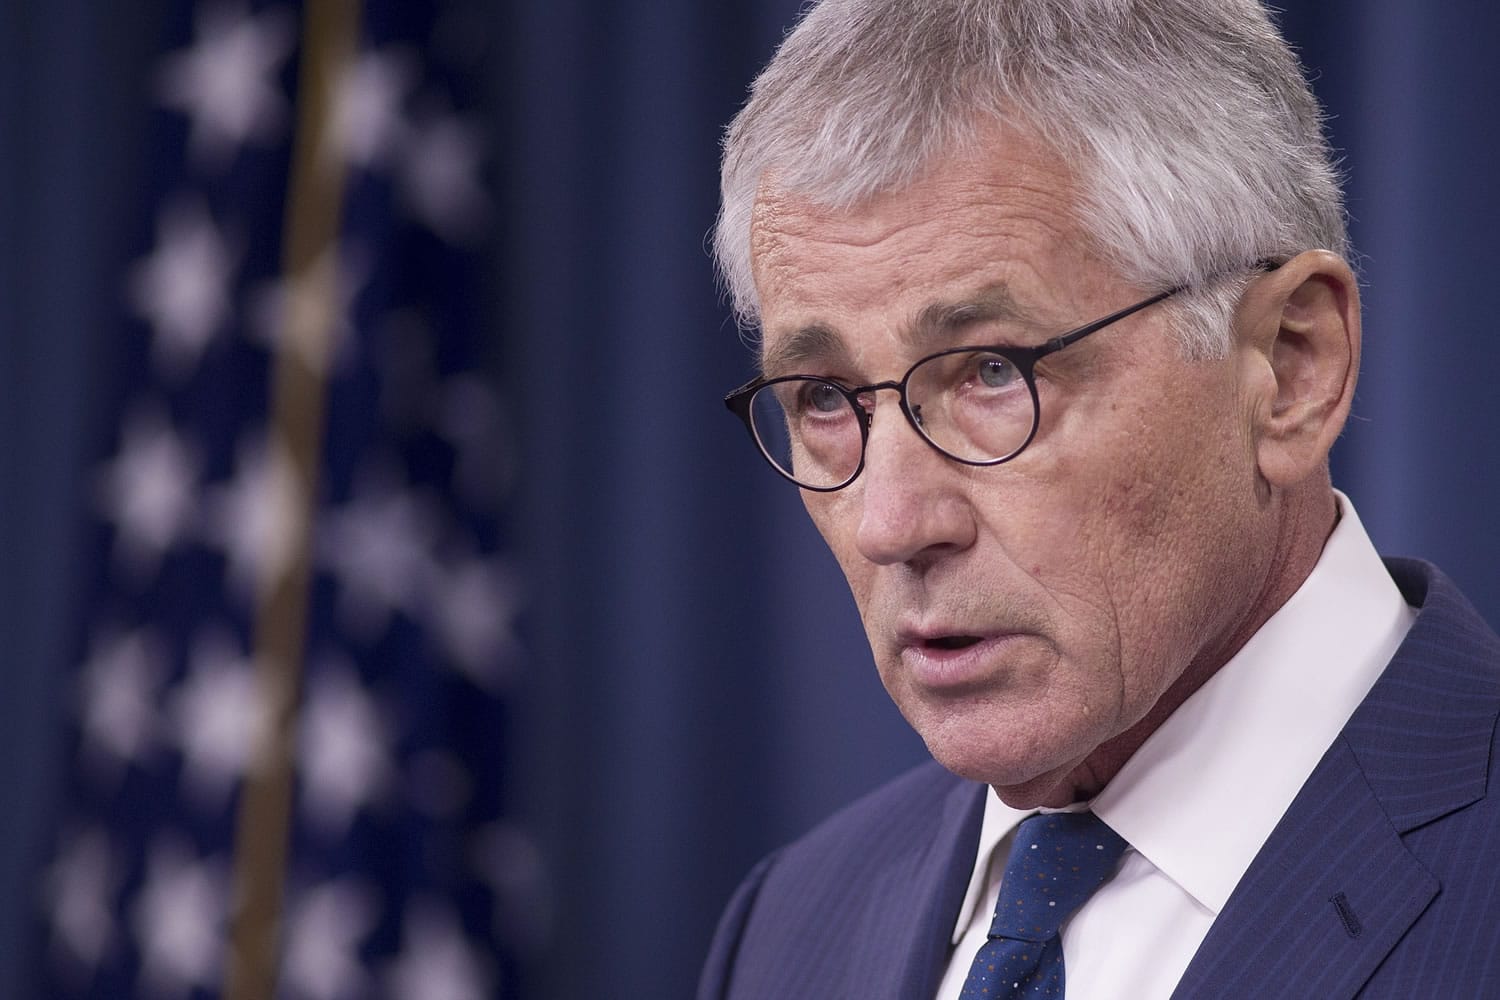 Defense Secretary Chuck Hagel speaks during a news conference at the Pentagon.